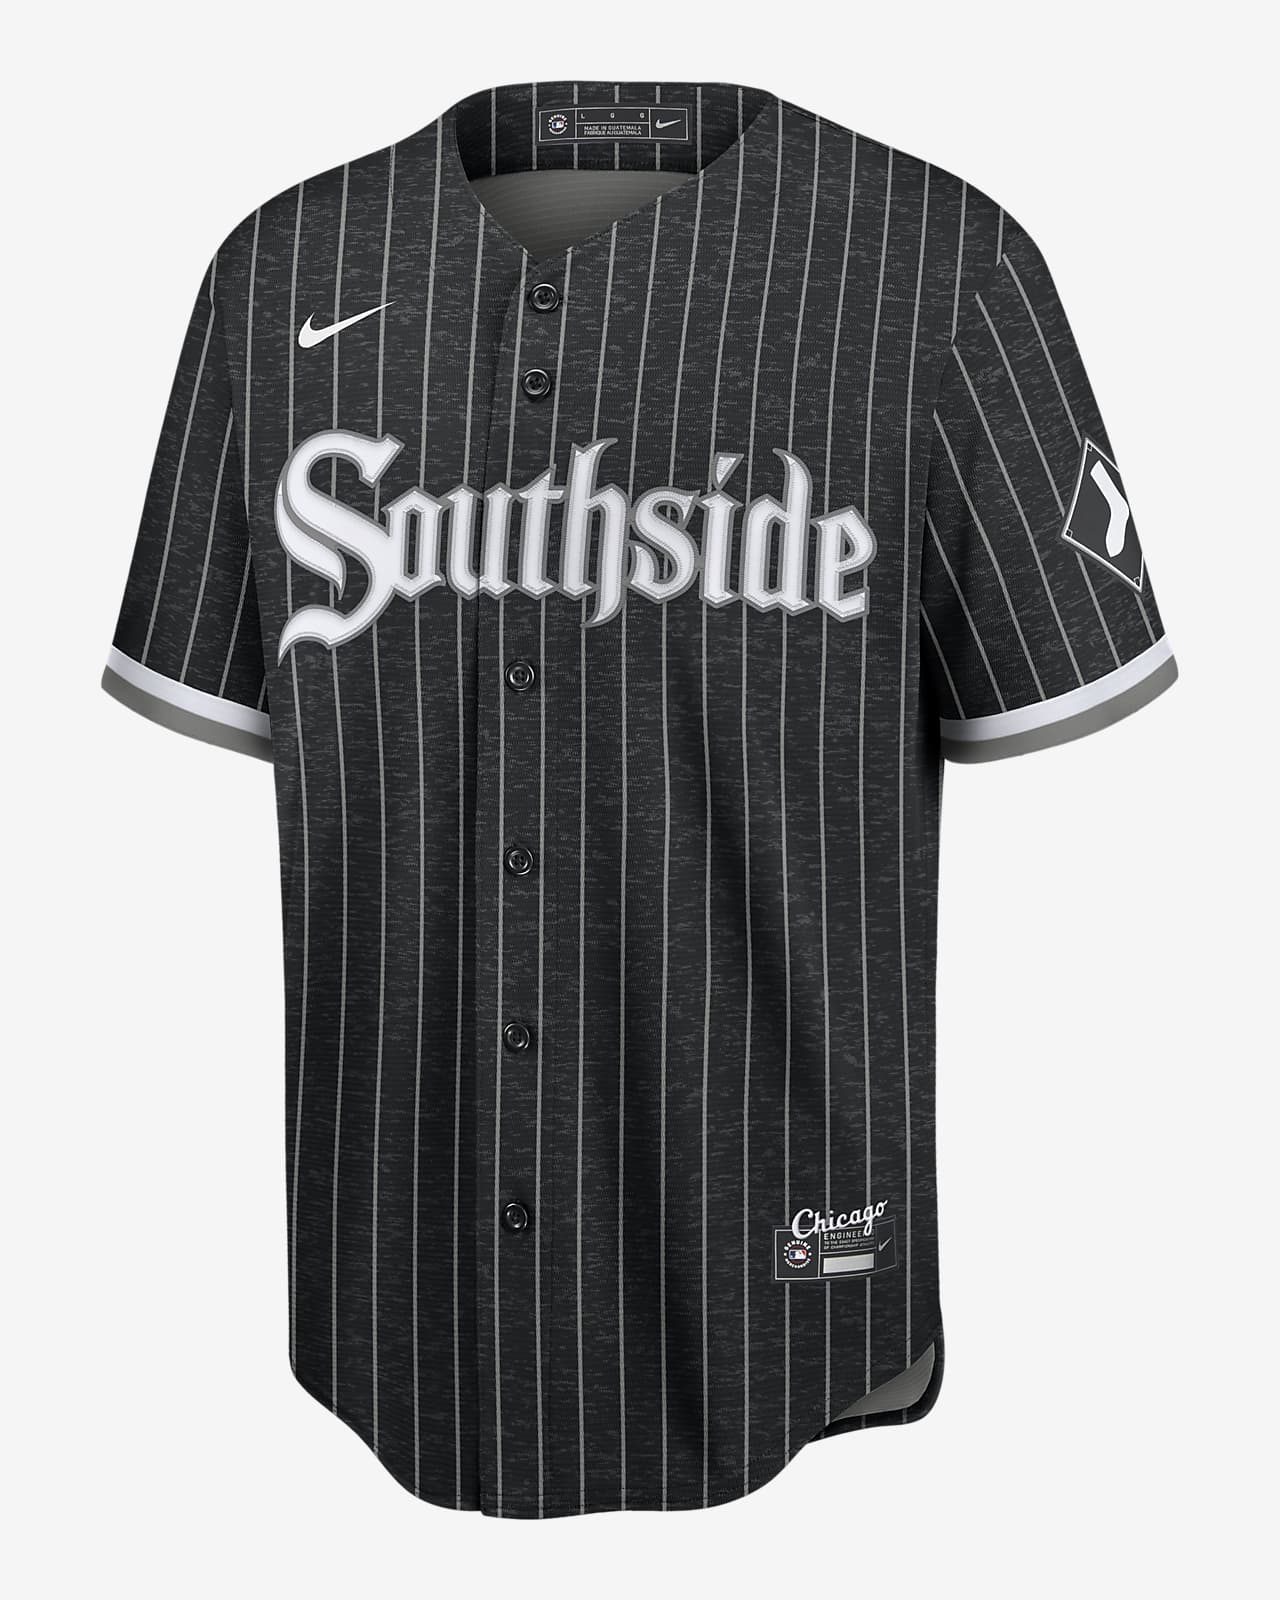 city connect white sox jerseys